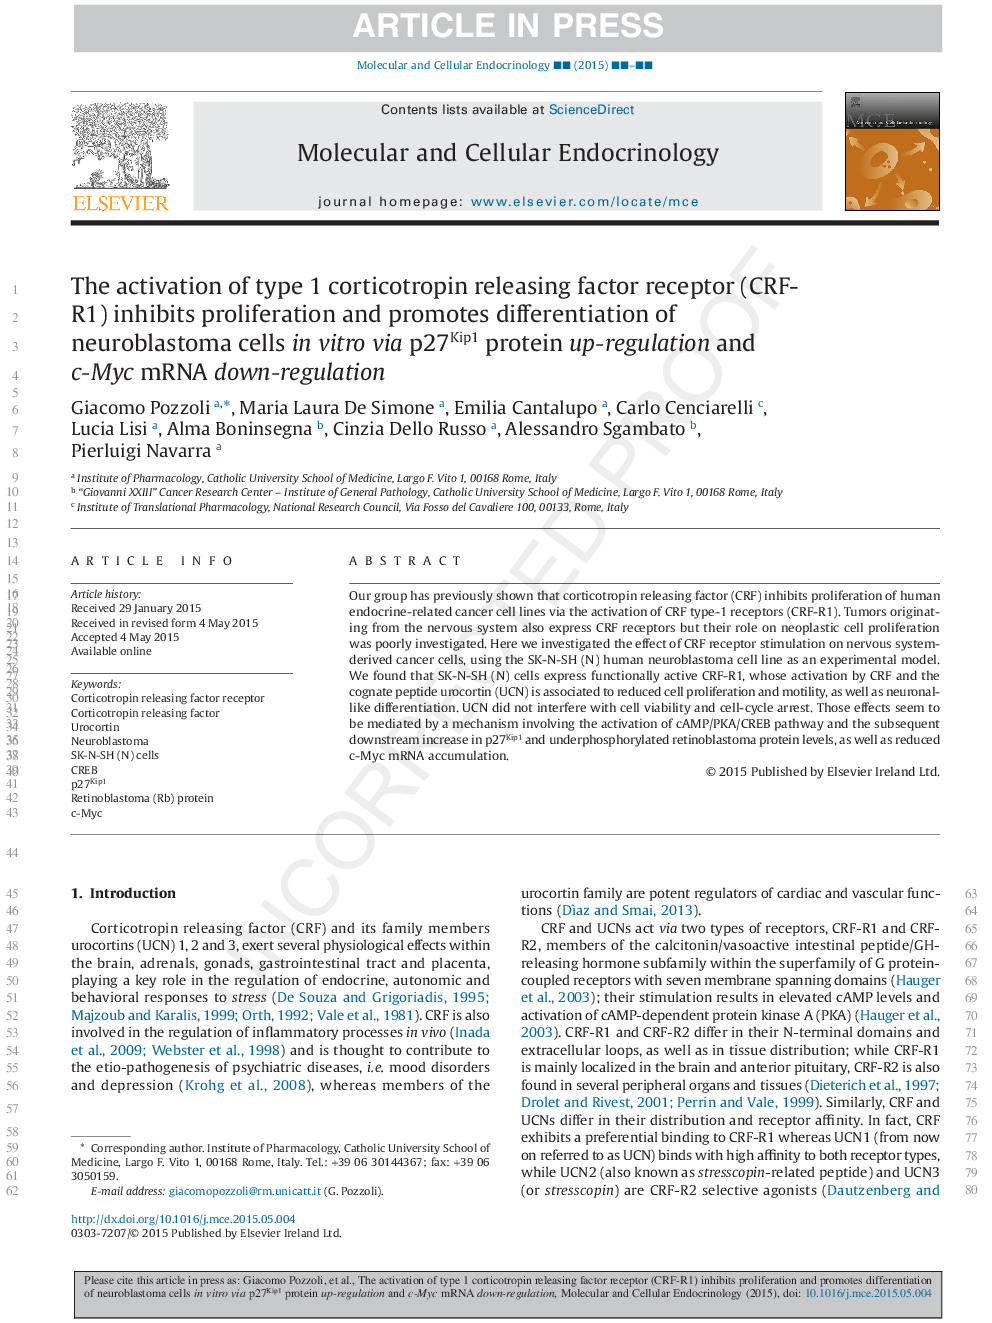 The activation of type 1 corticotropin releasing factor receptor (CRF-R1) inhibits proliferation and promotes differentiation of neuroblastoma cells in vitro via p27Kip1 protein up-regulation and c-Myc mRNA down-regulation